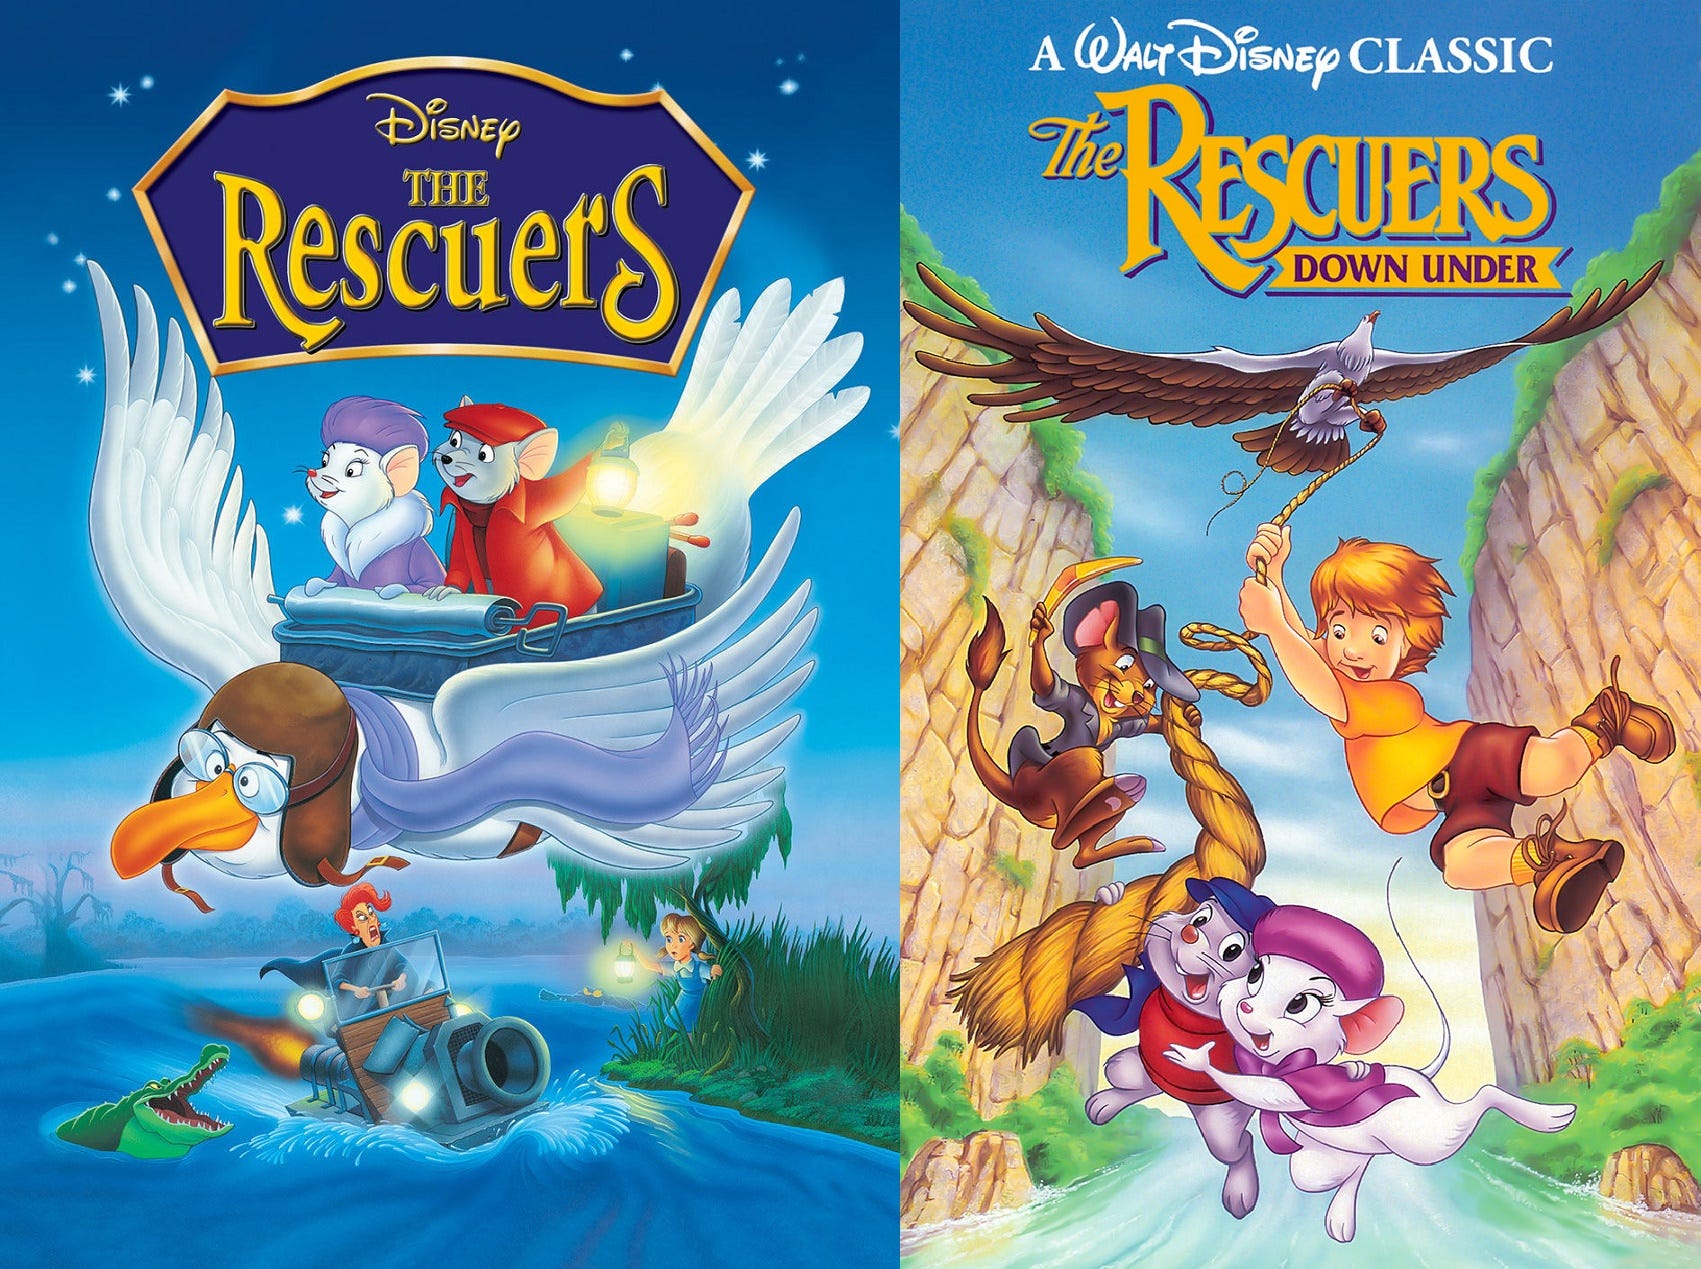 Feminisney “The Rescuers” and “The Rescuers Down Under” by Sean Randall CineNation Medium